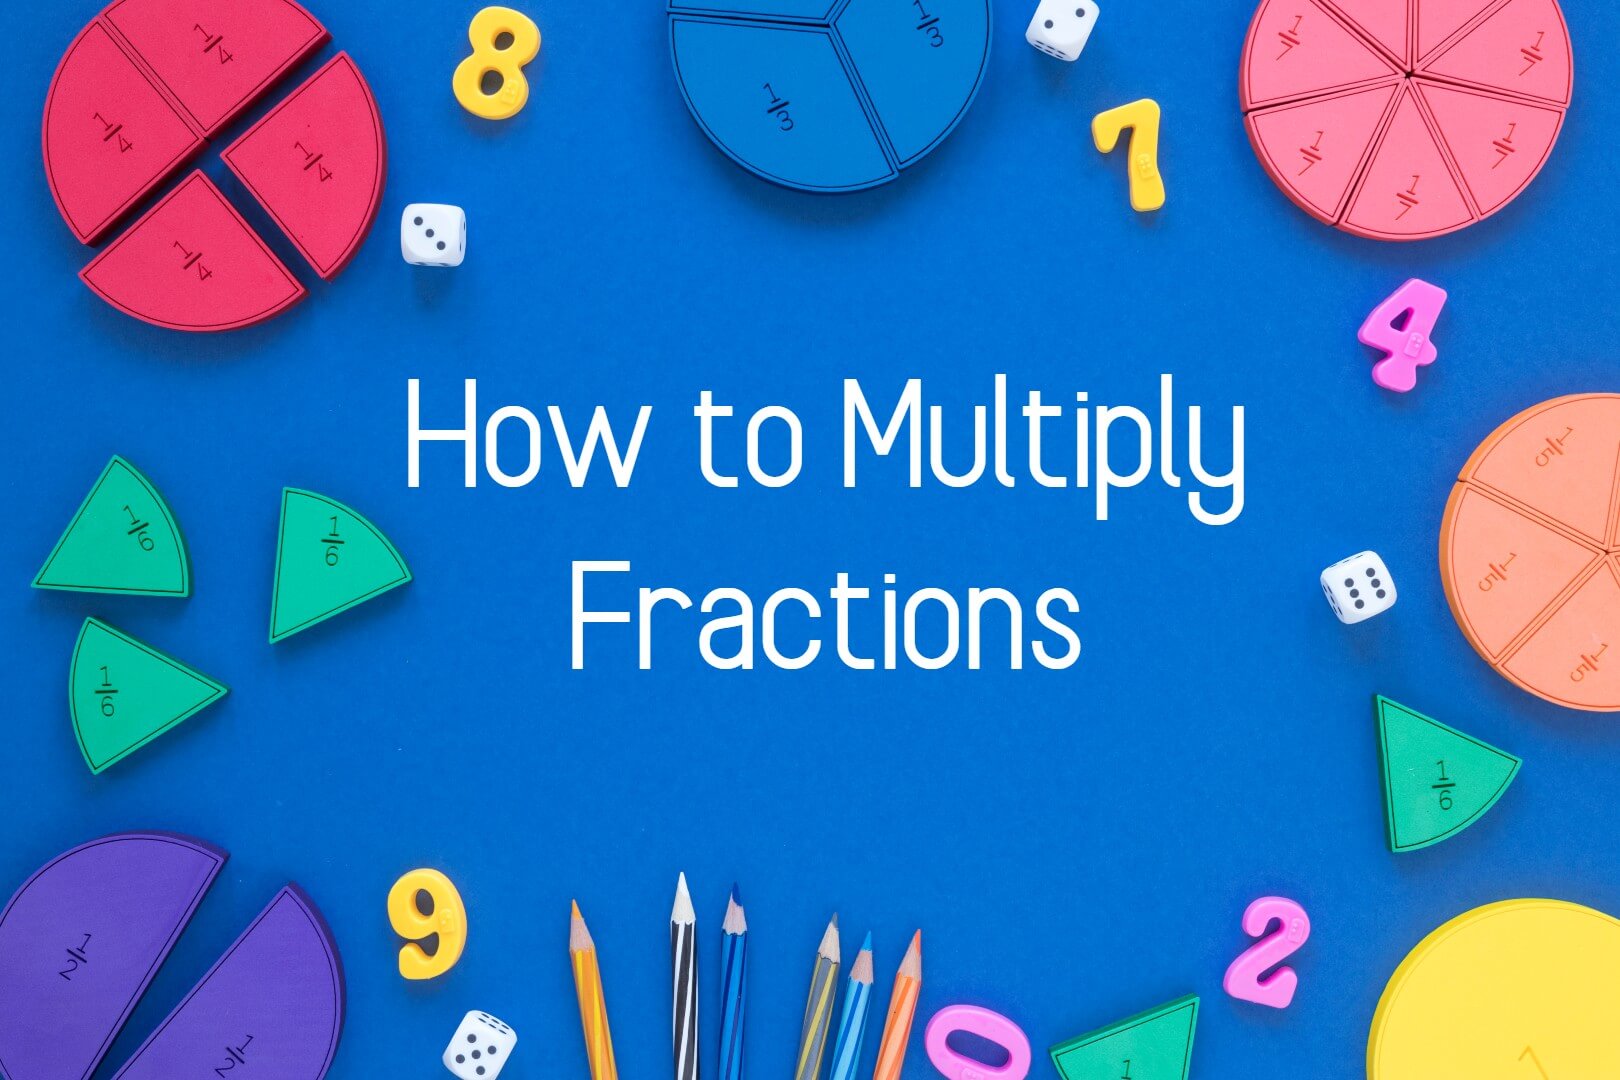 how-to-multiply-fractions-in-3-steps-updated-math-tutor